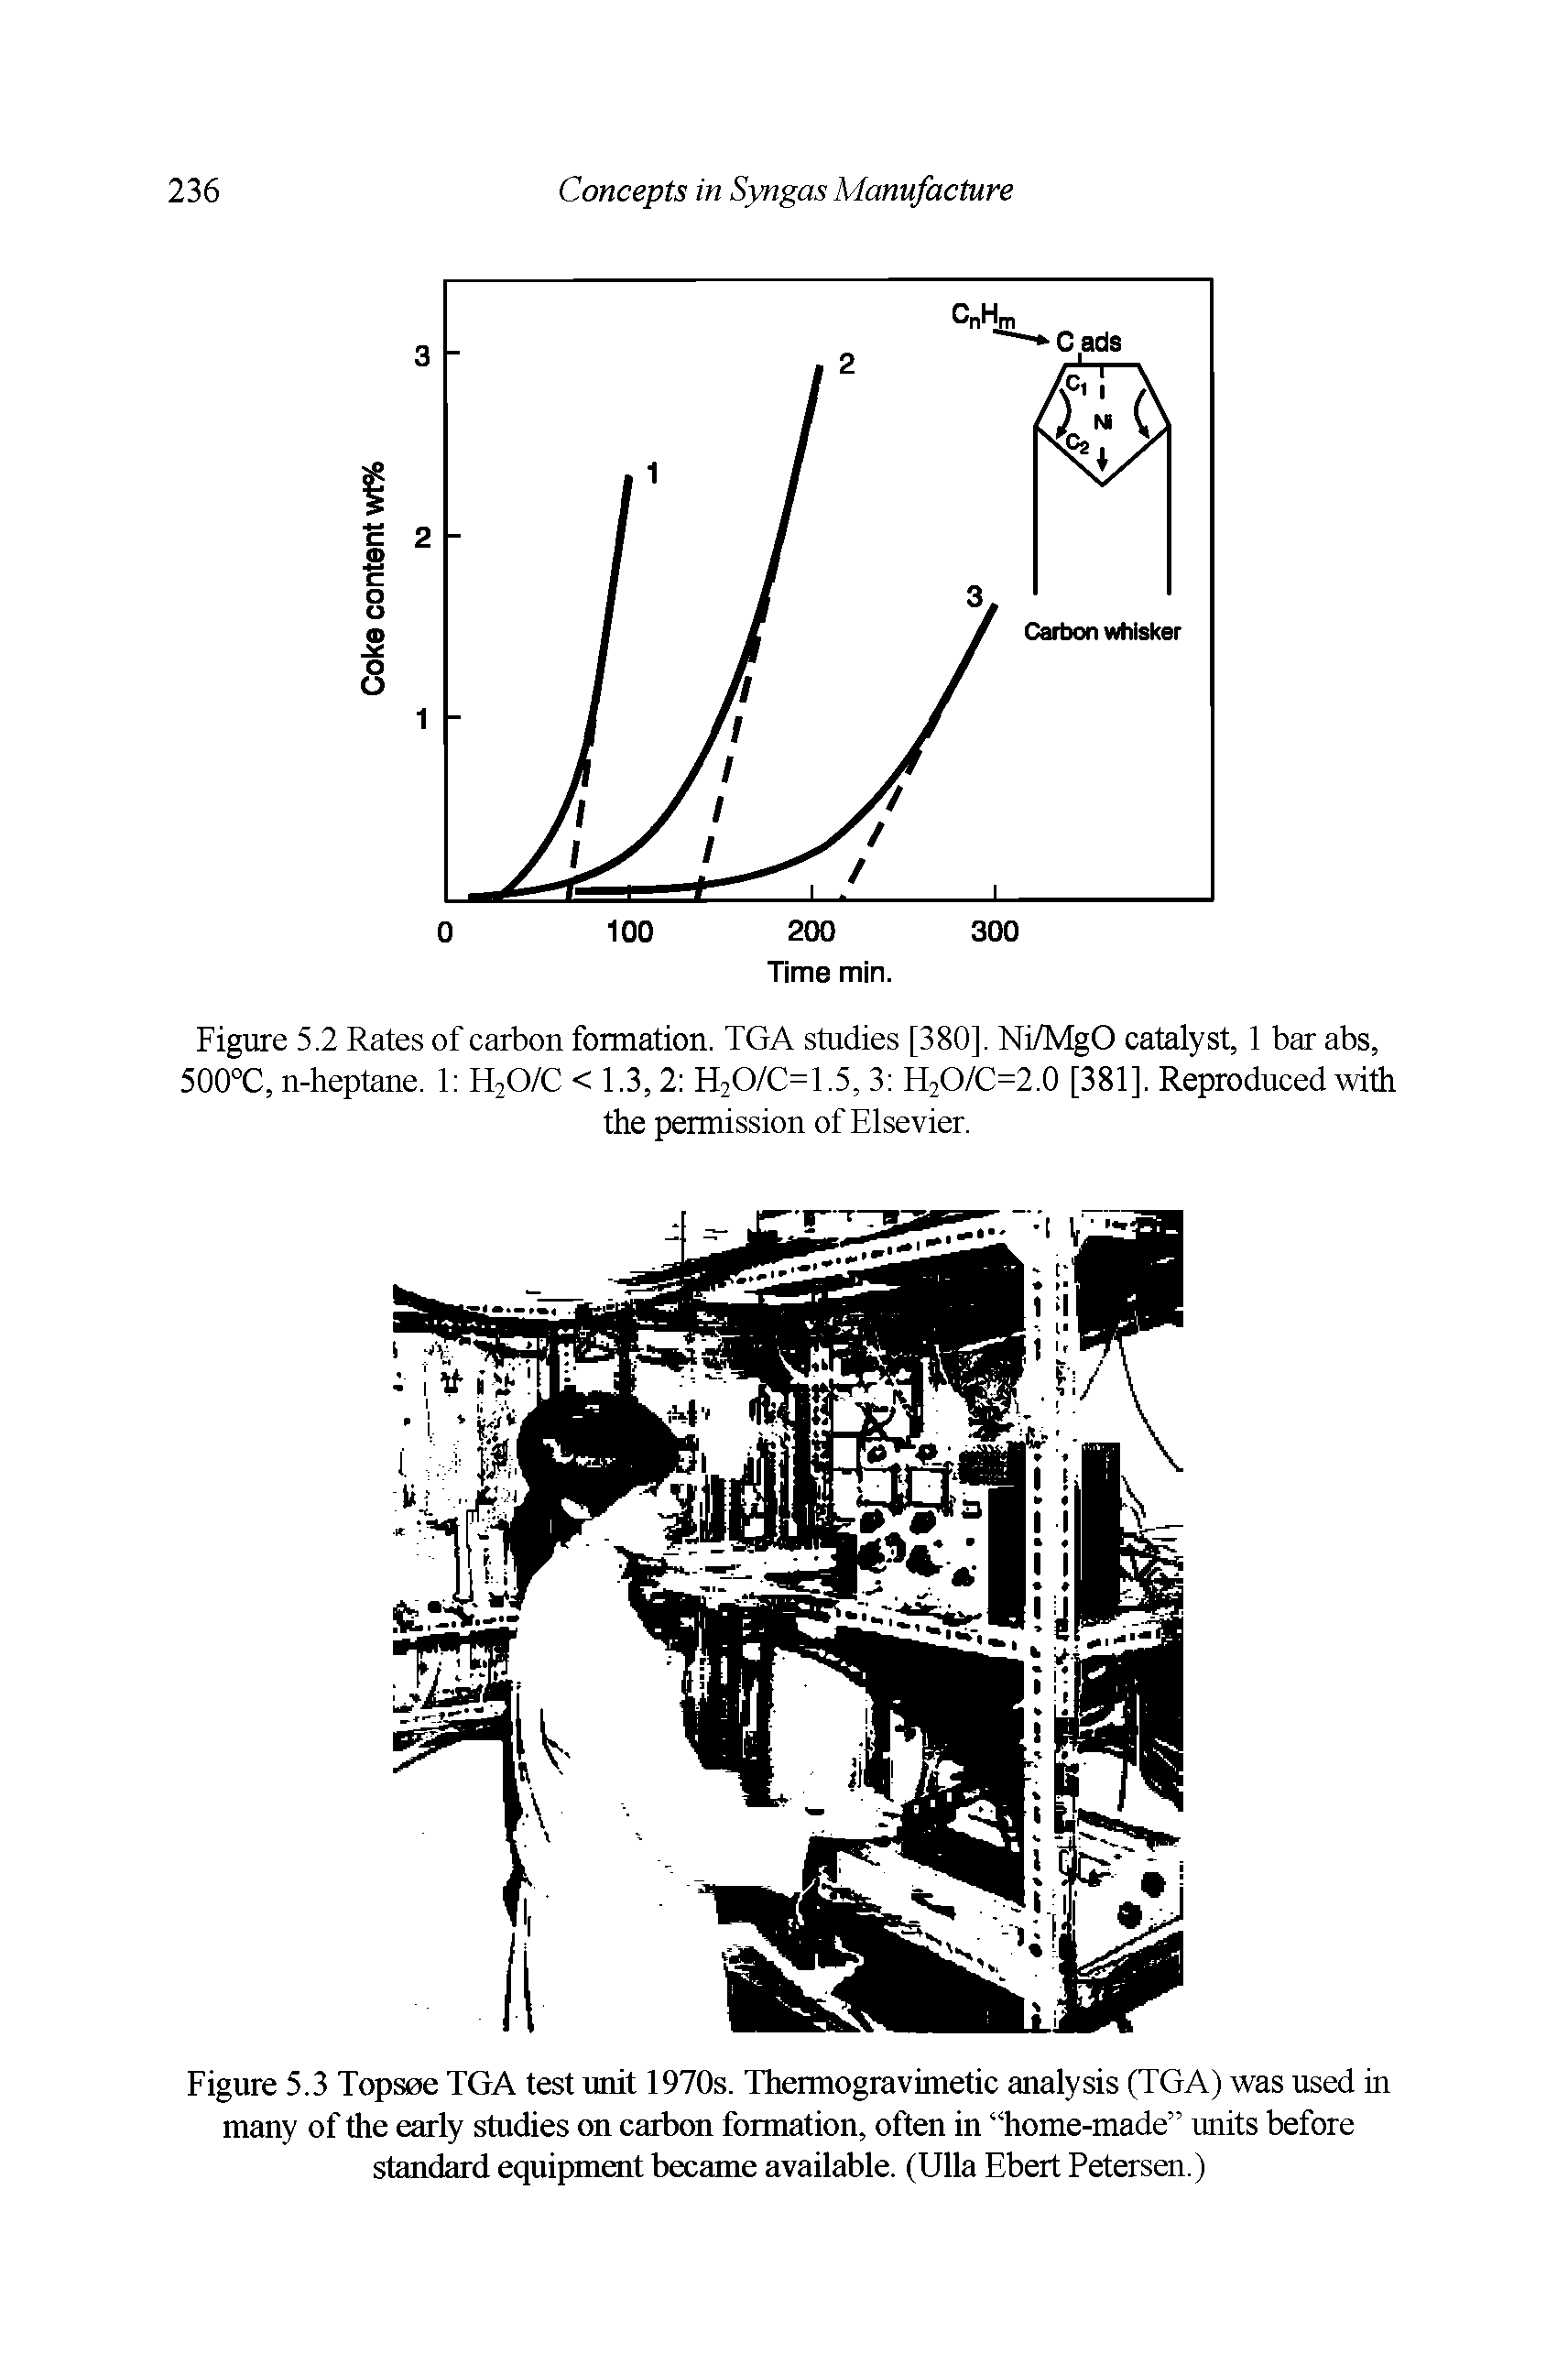 Figure 5.3 Topsoe TGA test unit 1970s. Thermogravimetic analysis (TGA) was used in many of the early studies on carbon formation, often in home-made units before standard equipment became available. (Ulla Ebert Petersen.)...